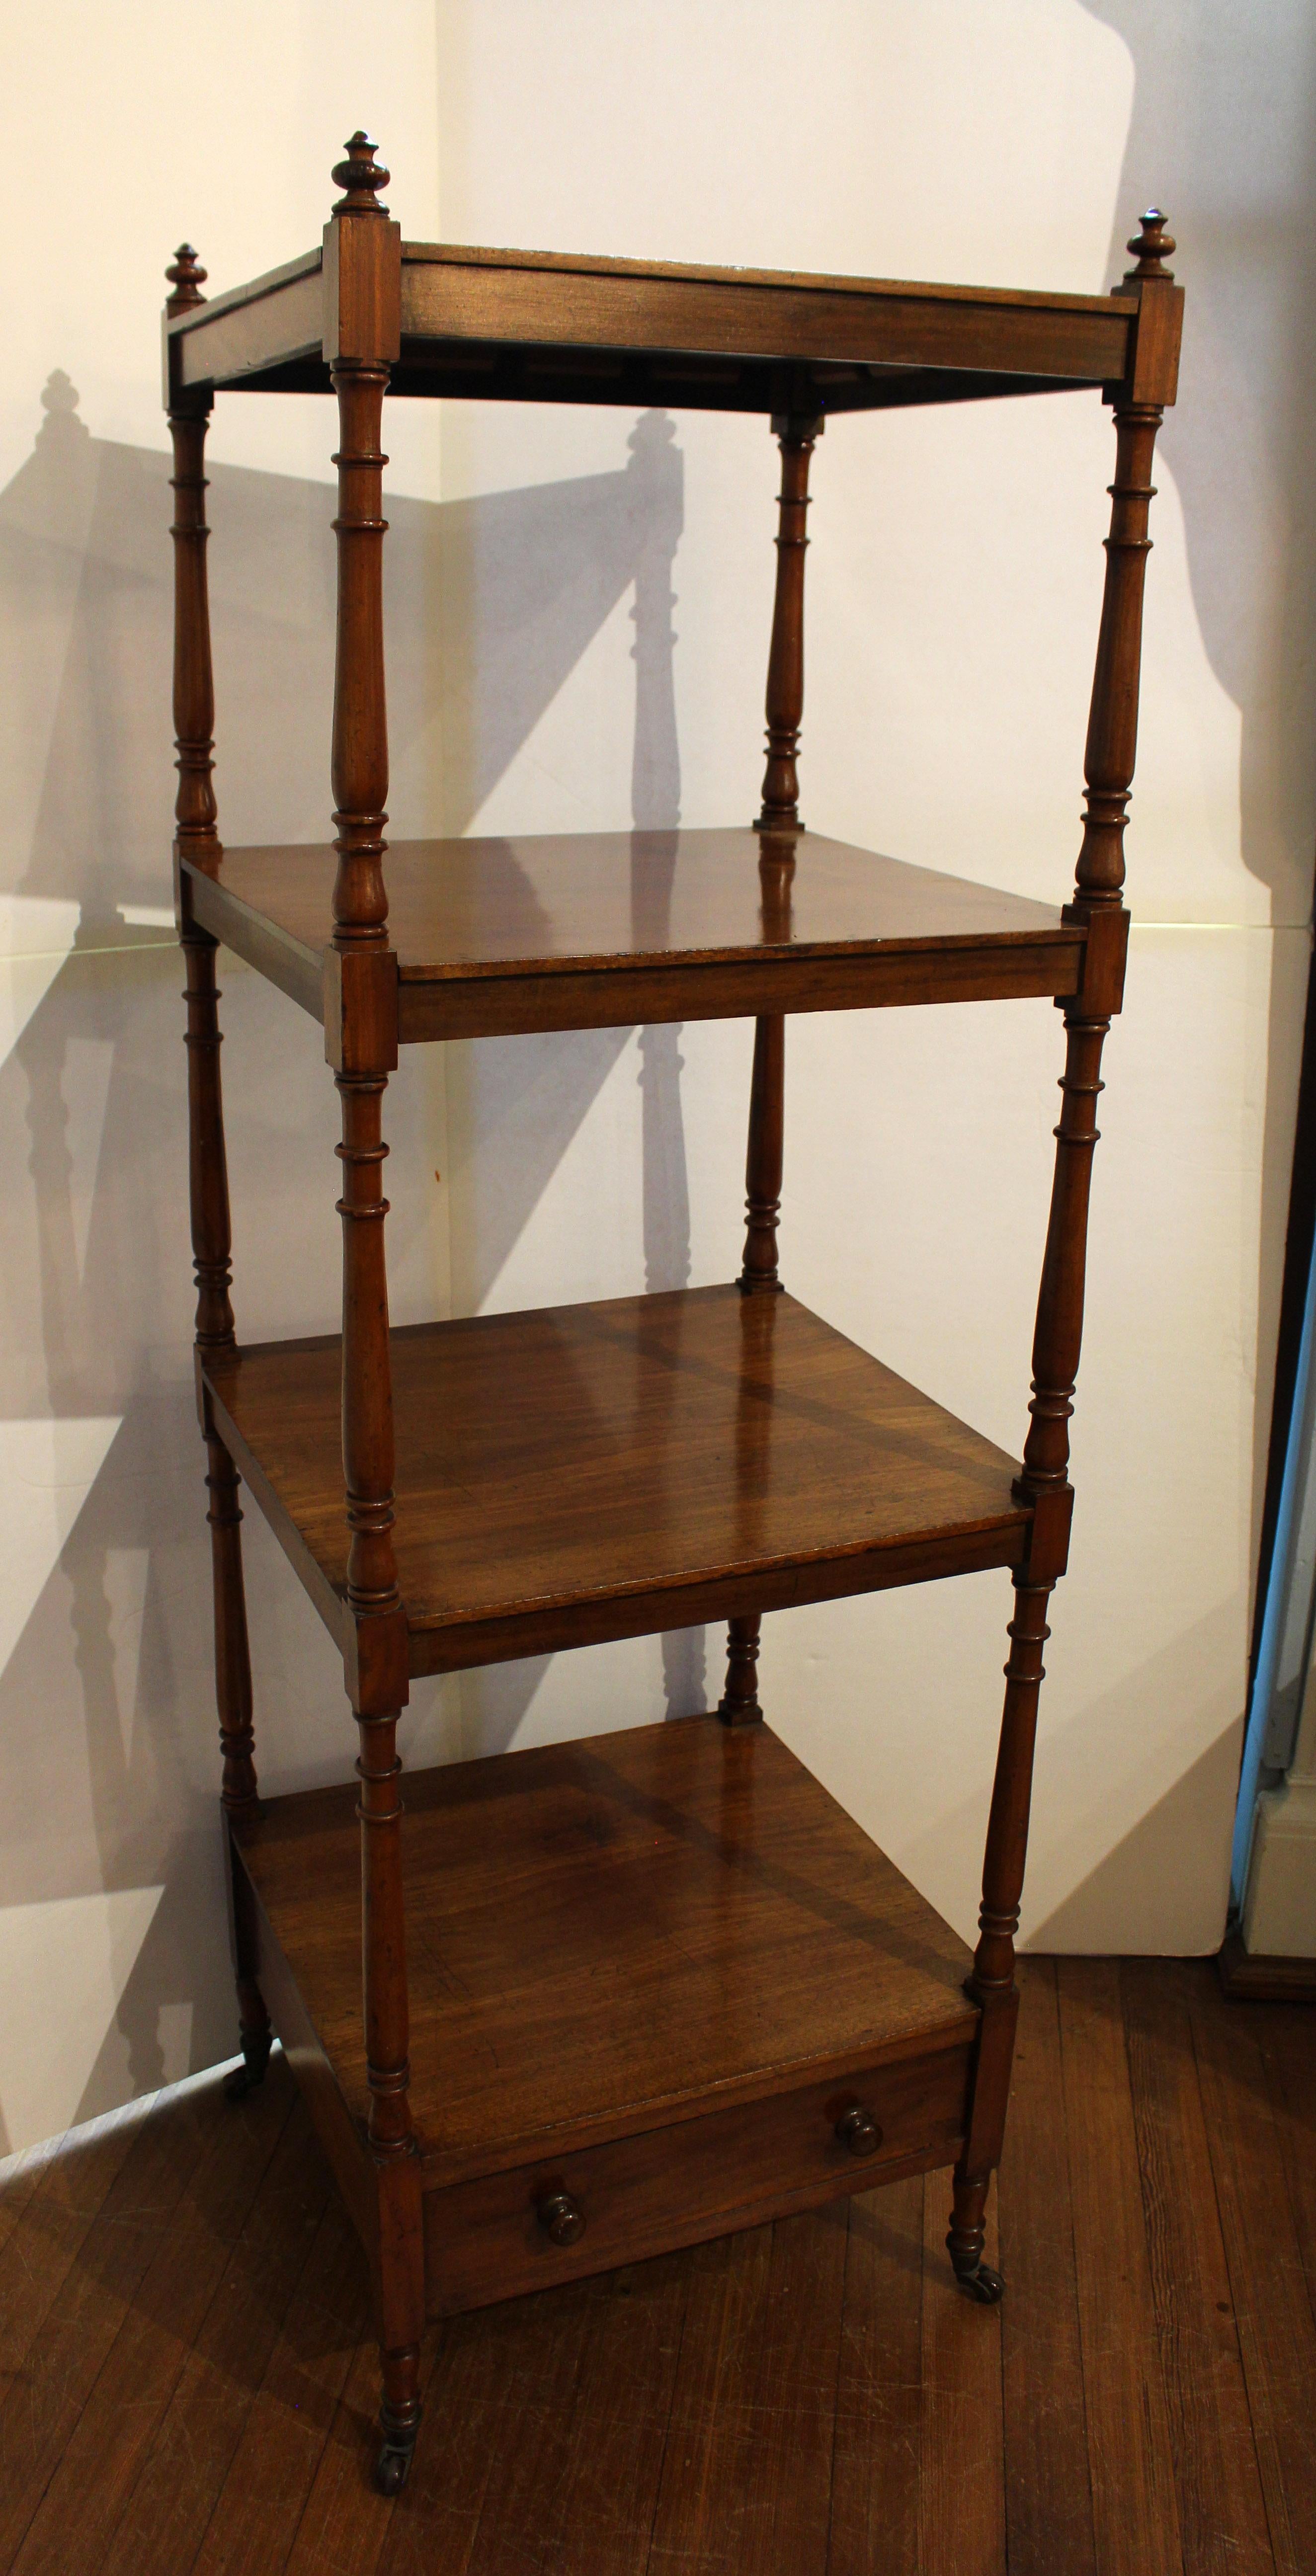 Regency period, early 19th century, tall what-not stand or etagere. English, mahogany. A rarely found tall example with 4 tiers over a drawer with original turned wood pulls. Nicely turned uprights with ring turnings & vasiform accents finished with